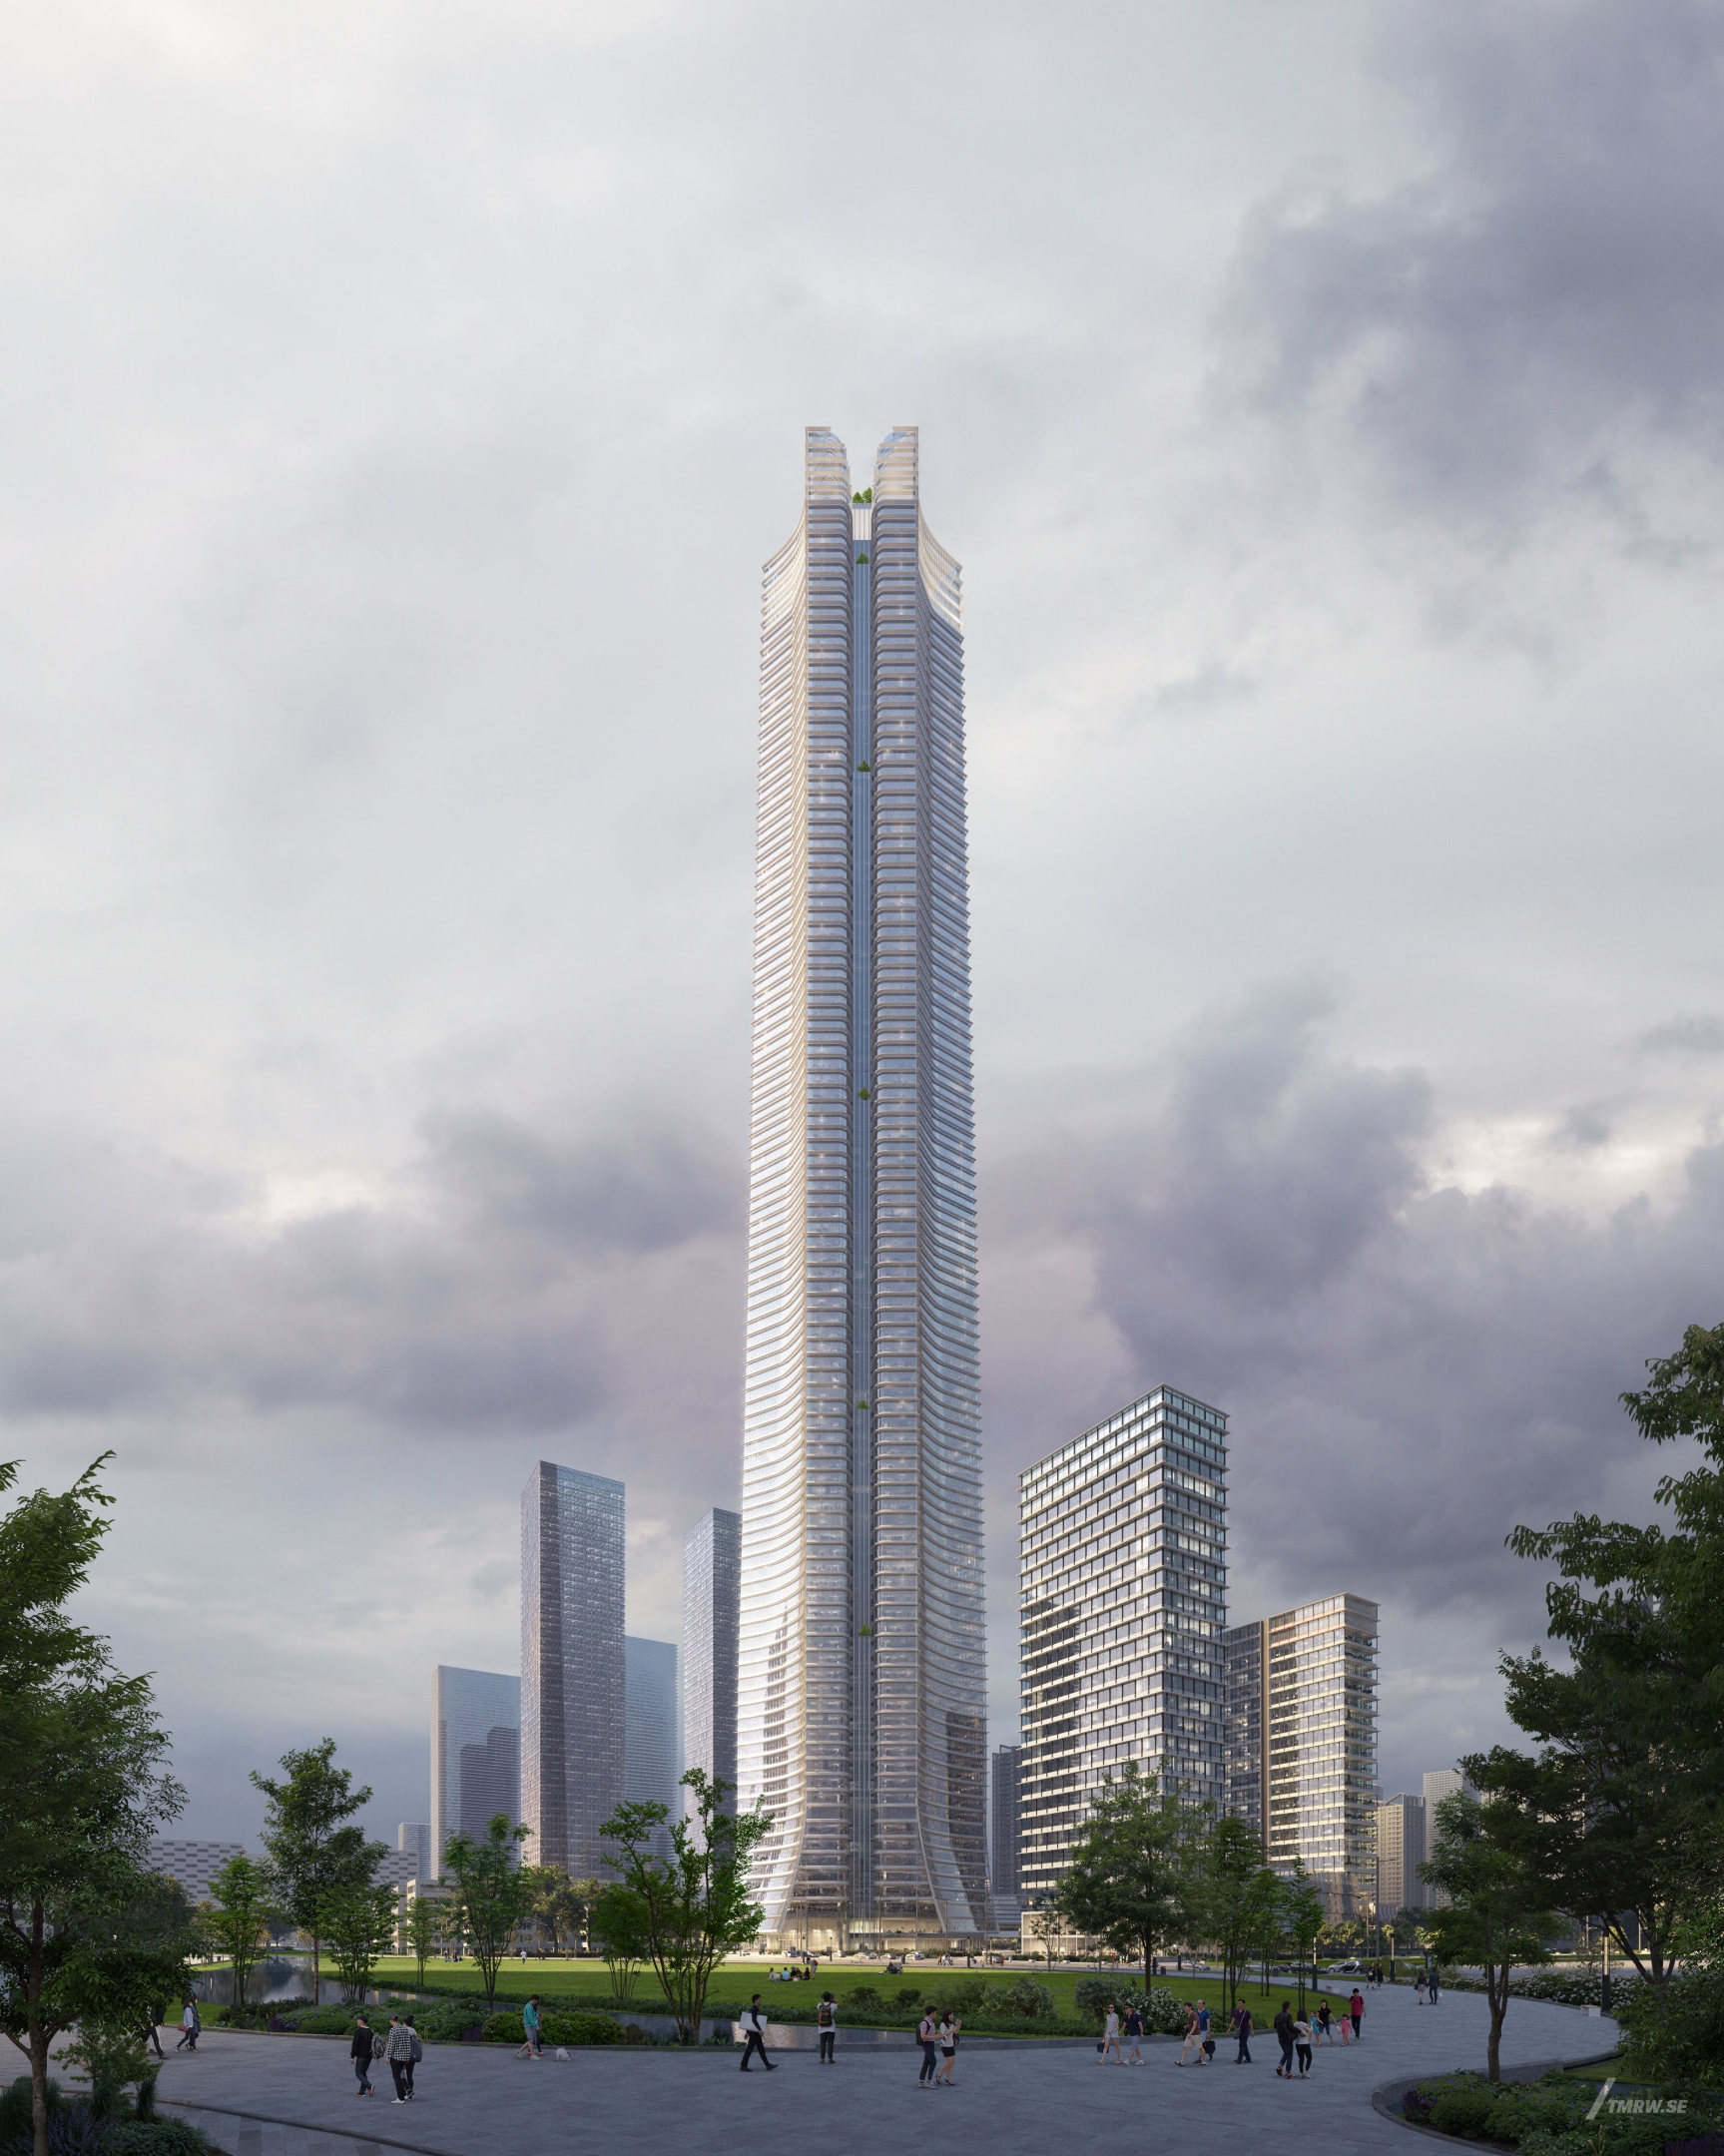 Architectural visualization of Agile for KPF. An image of a supertall skyscraper at dusk from street view with people walking at the square in front of.